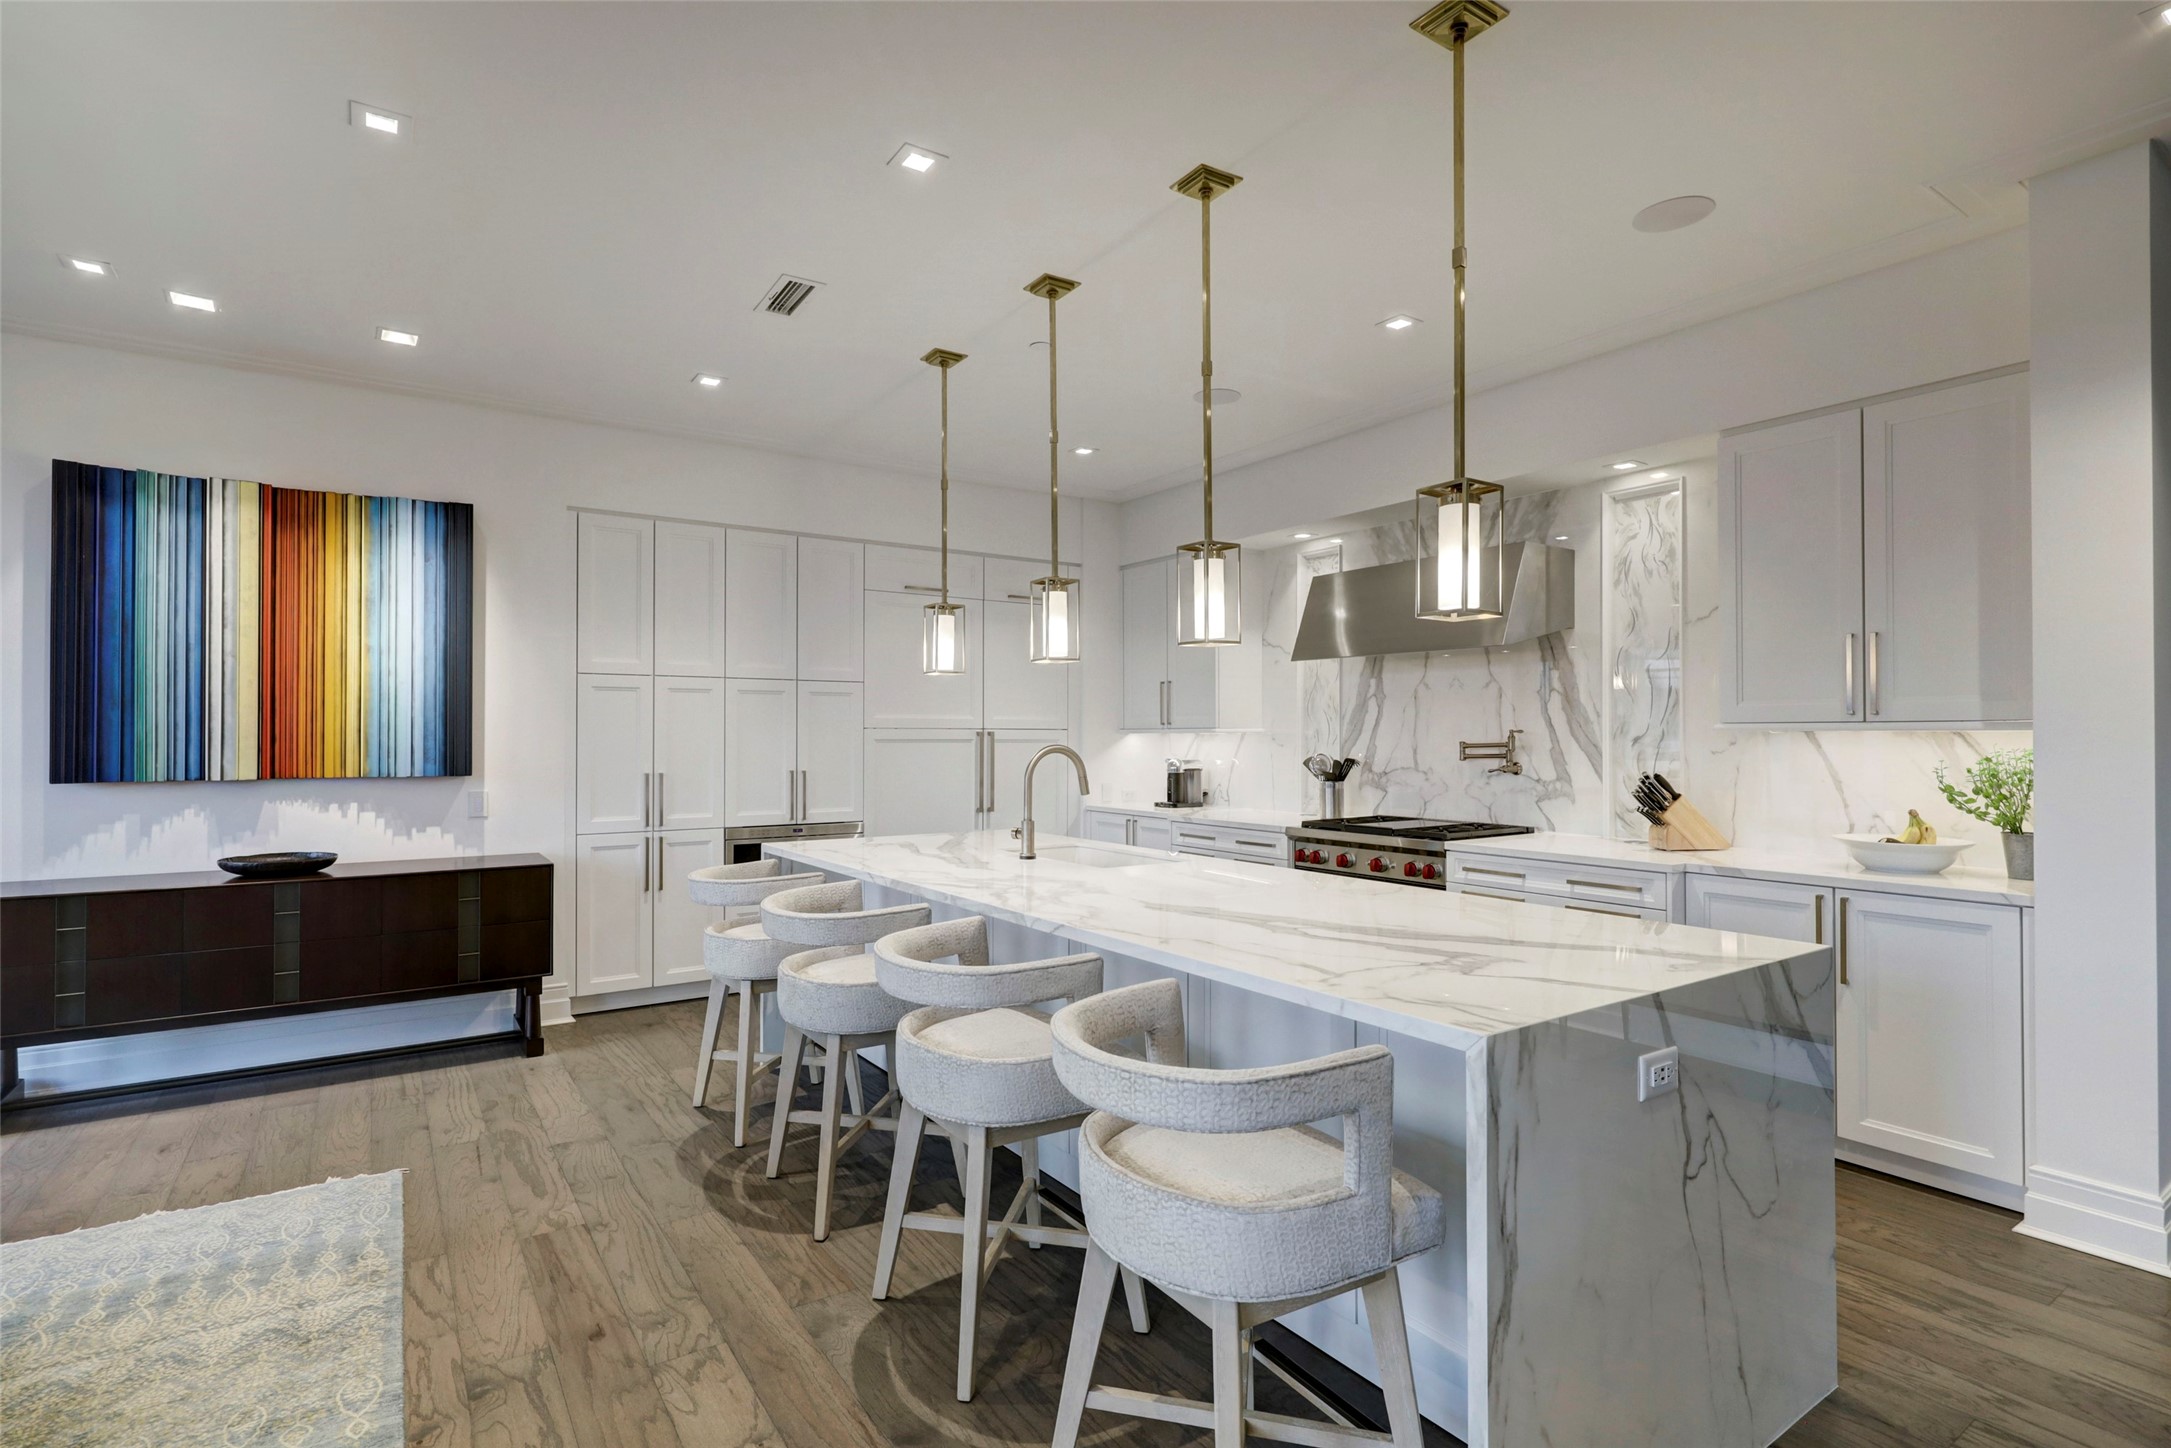 The sumptuous Kitchen features a waterfall island with seating for four.  The island, the counters and backsplash are all of quartz with magnificent movement and colors.